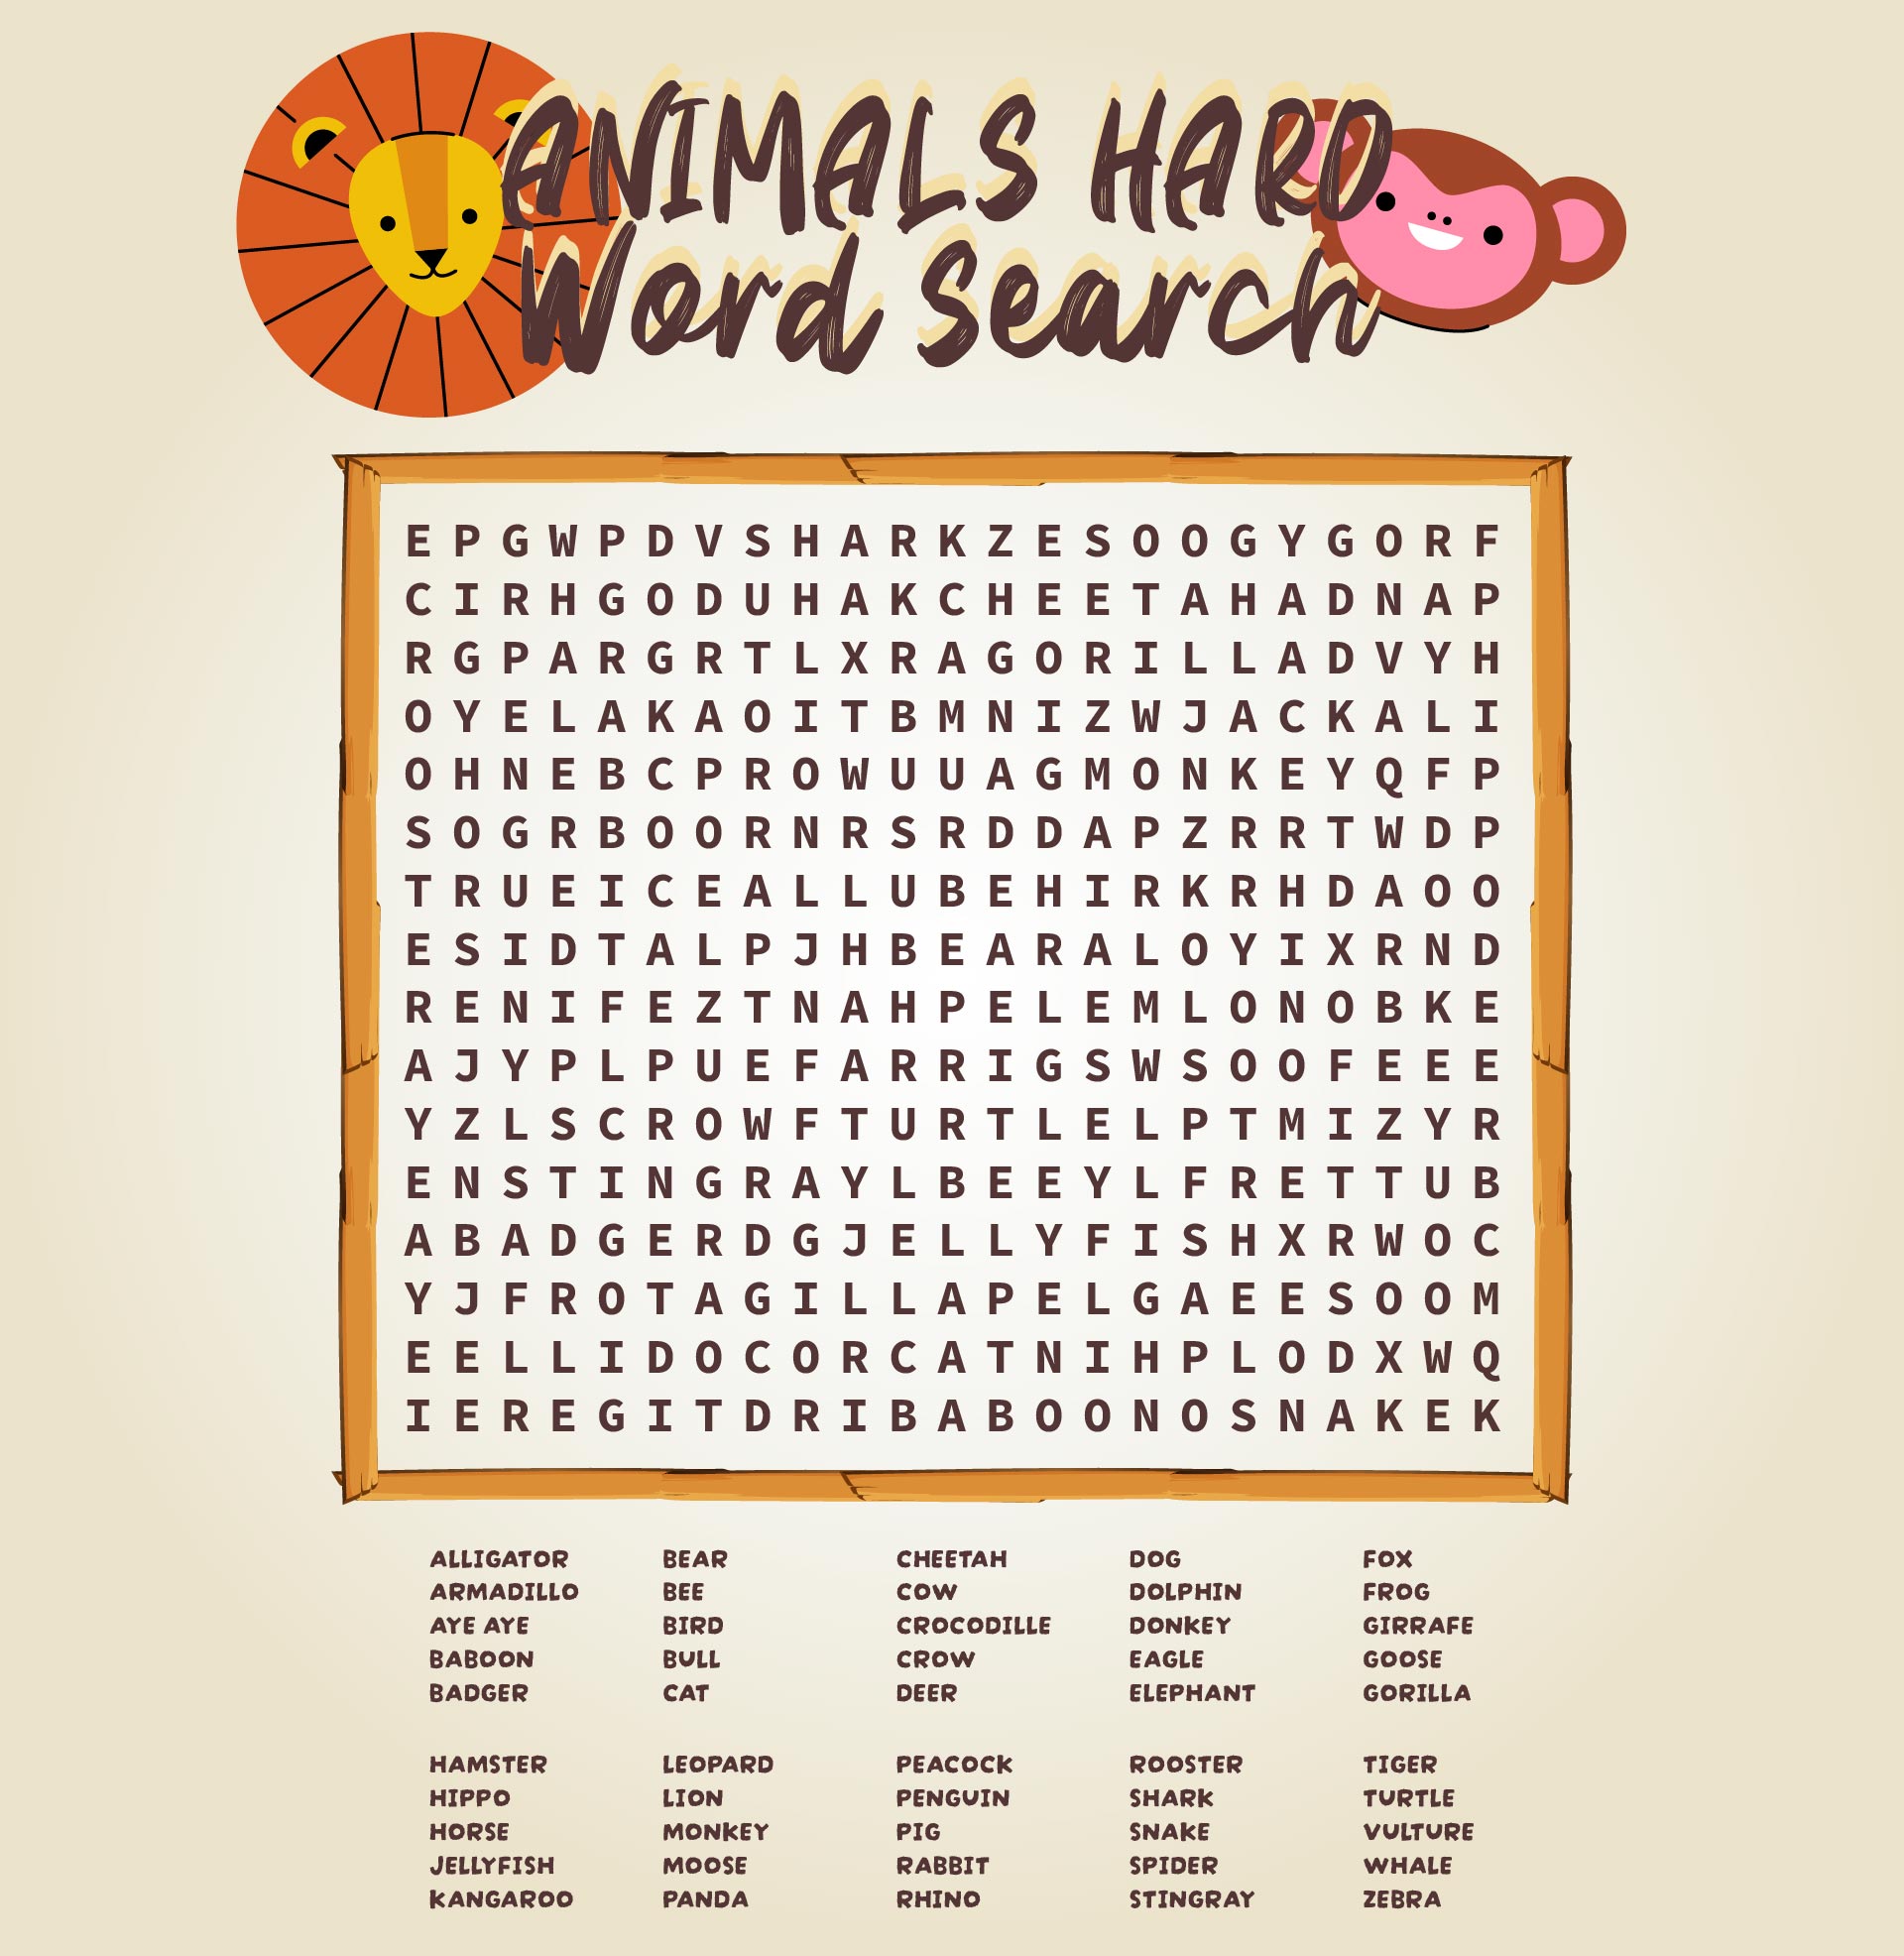 Very Hard Word Searches Printable